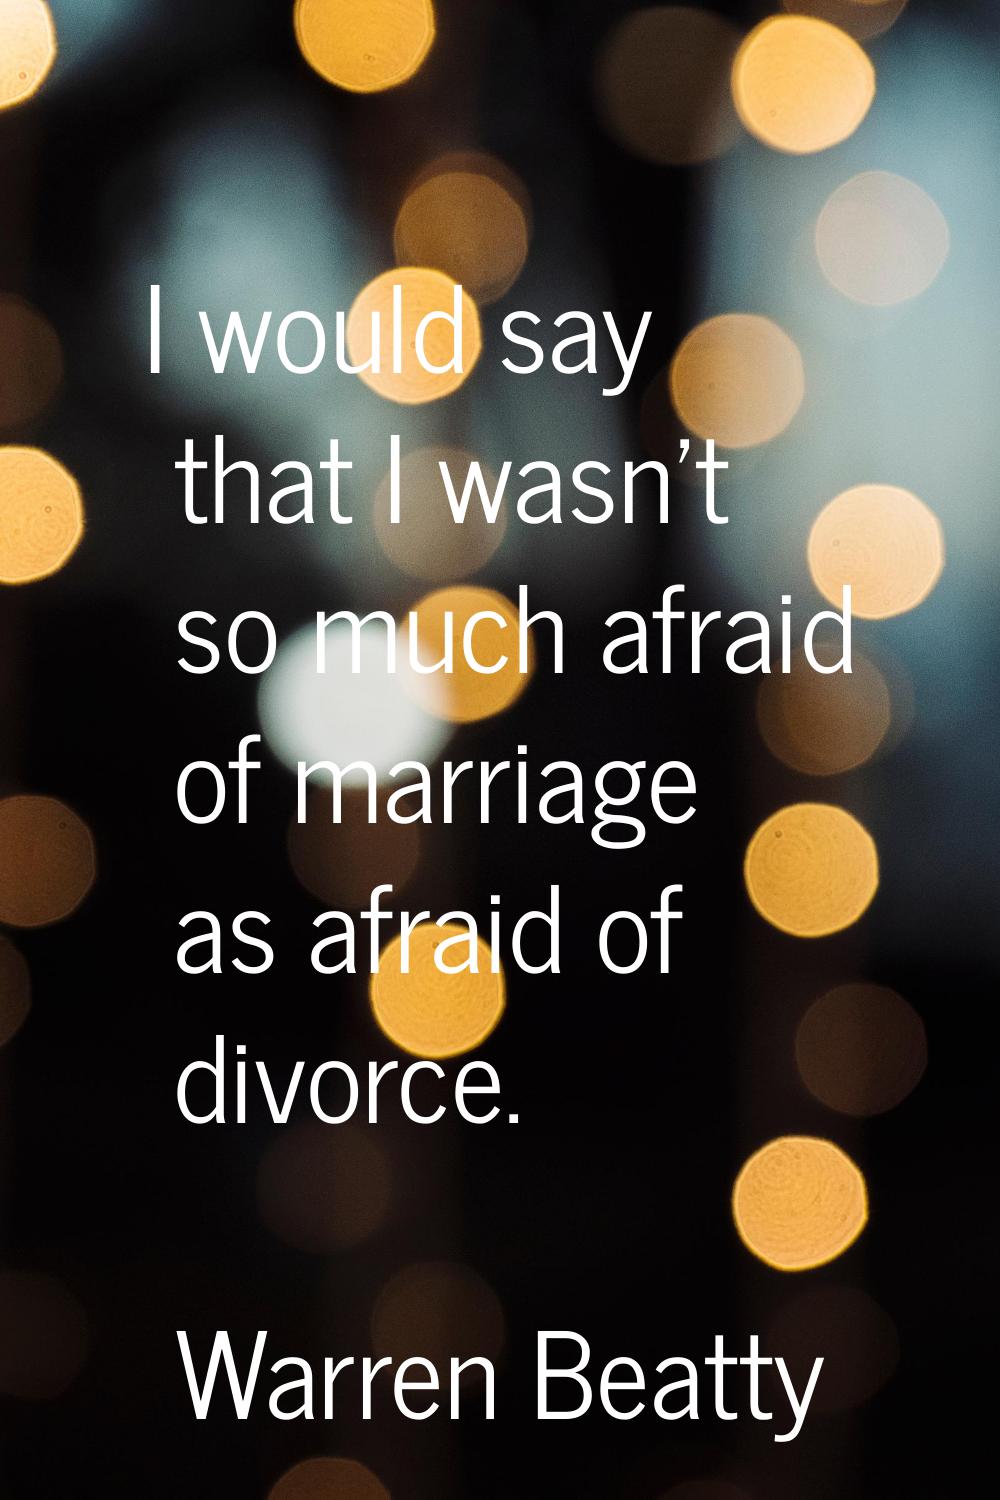 I would say that I wasn't so much afraid of marriage as afraid of divorce.